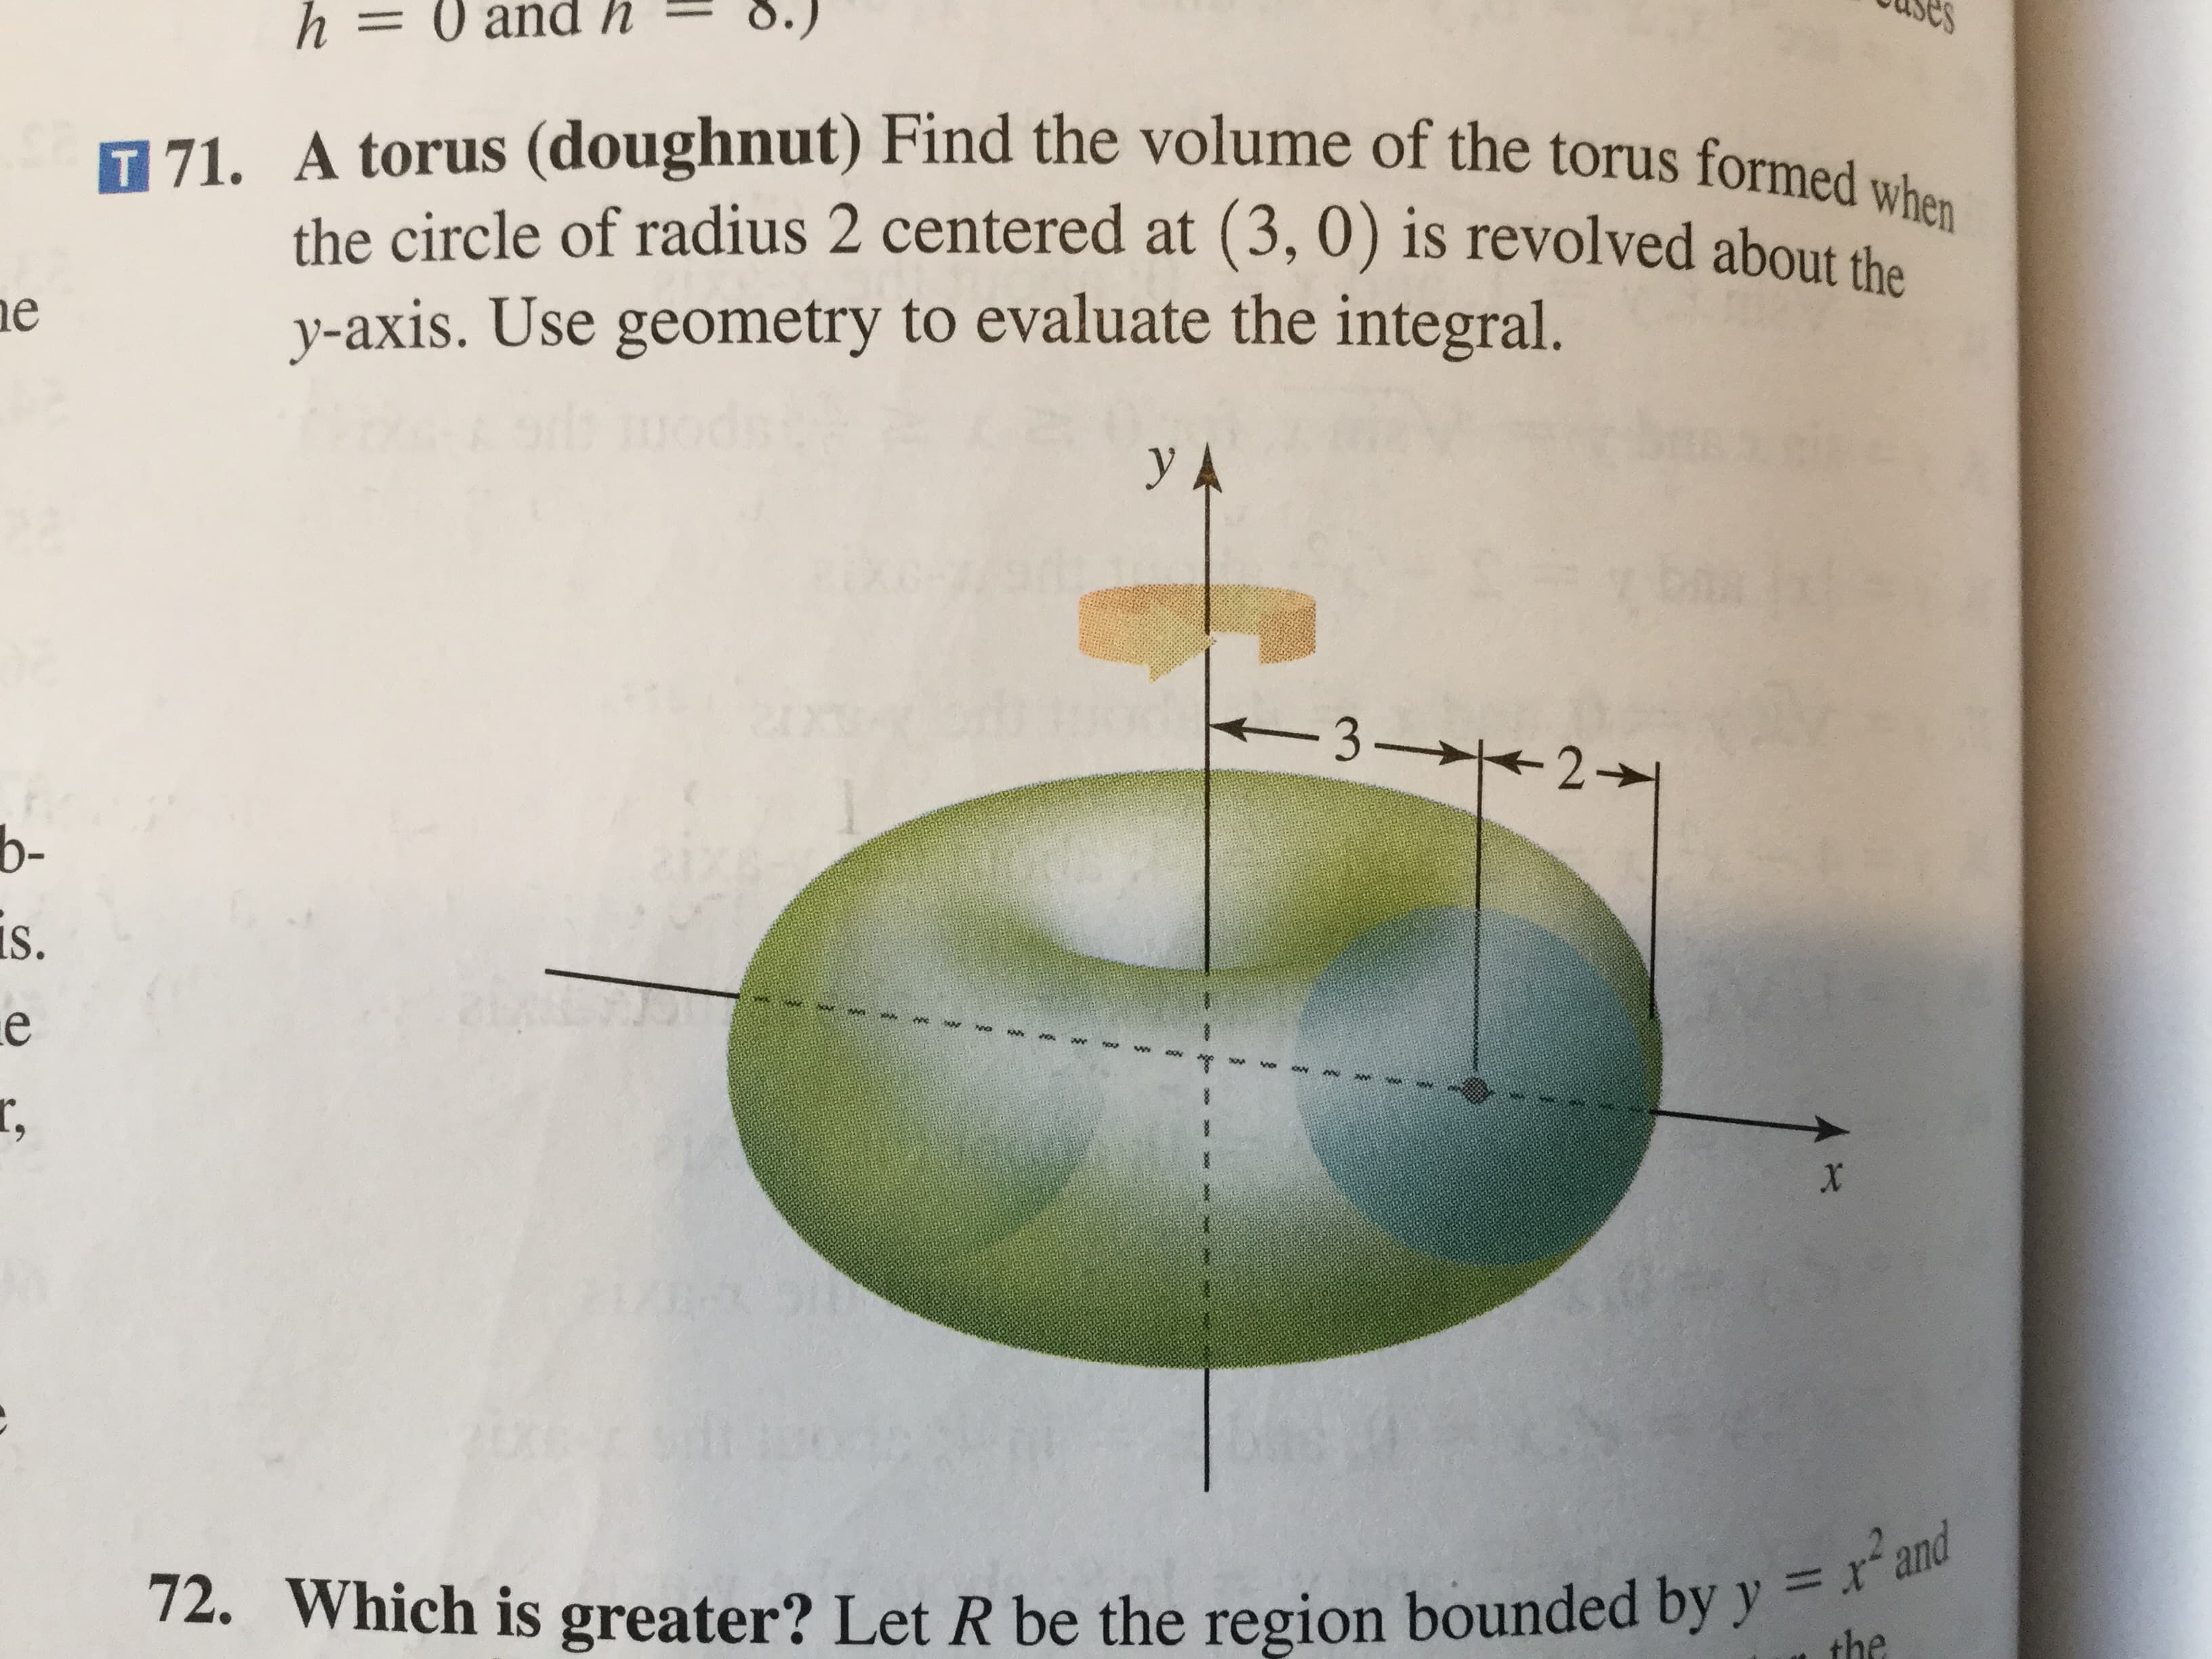 es
h= 0 and h
T 71. A torus (doughnut) Find the volume of the torus formed when
the circle of radius 2 centered at (3, 0) is revolved about tha
y-axis. Use geometry to evaluate the integral.
e
y A
-3 21
b-
is.
e
r,
x
2U60
72. Which is greater? Let R be the region bounded by y = r'and
=
the
